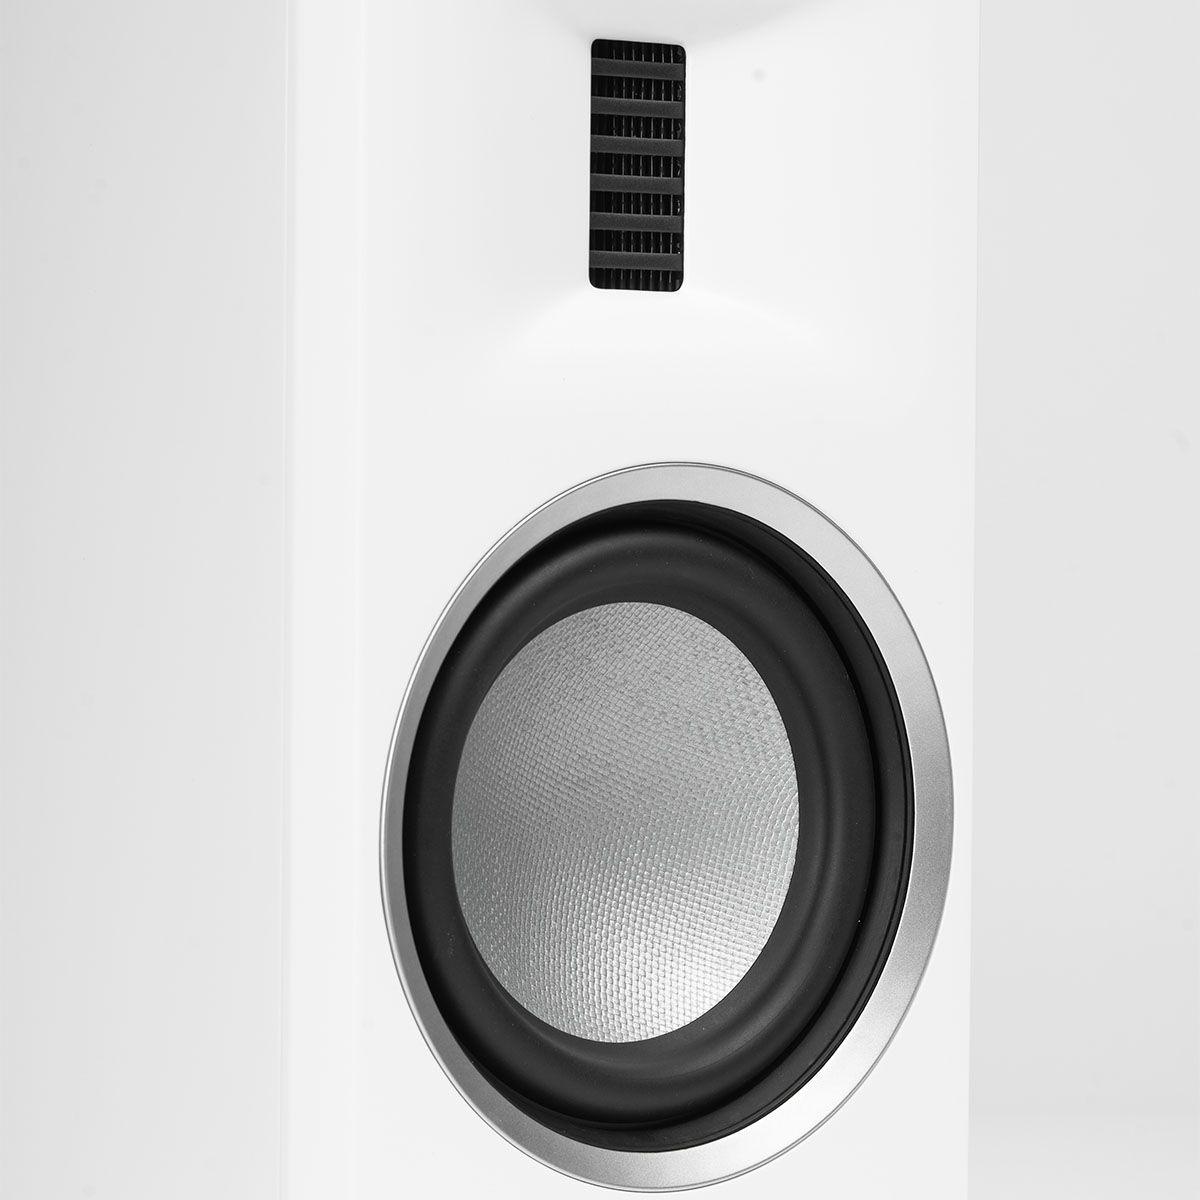 MartinLogan Motion XT B10  Bookshelf Speaker in white, angled view without grilles on white background